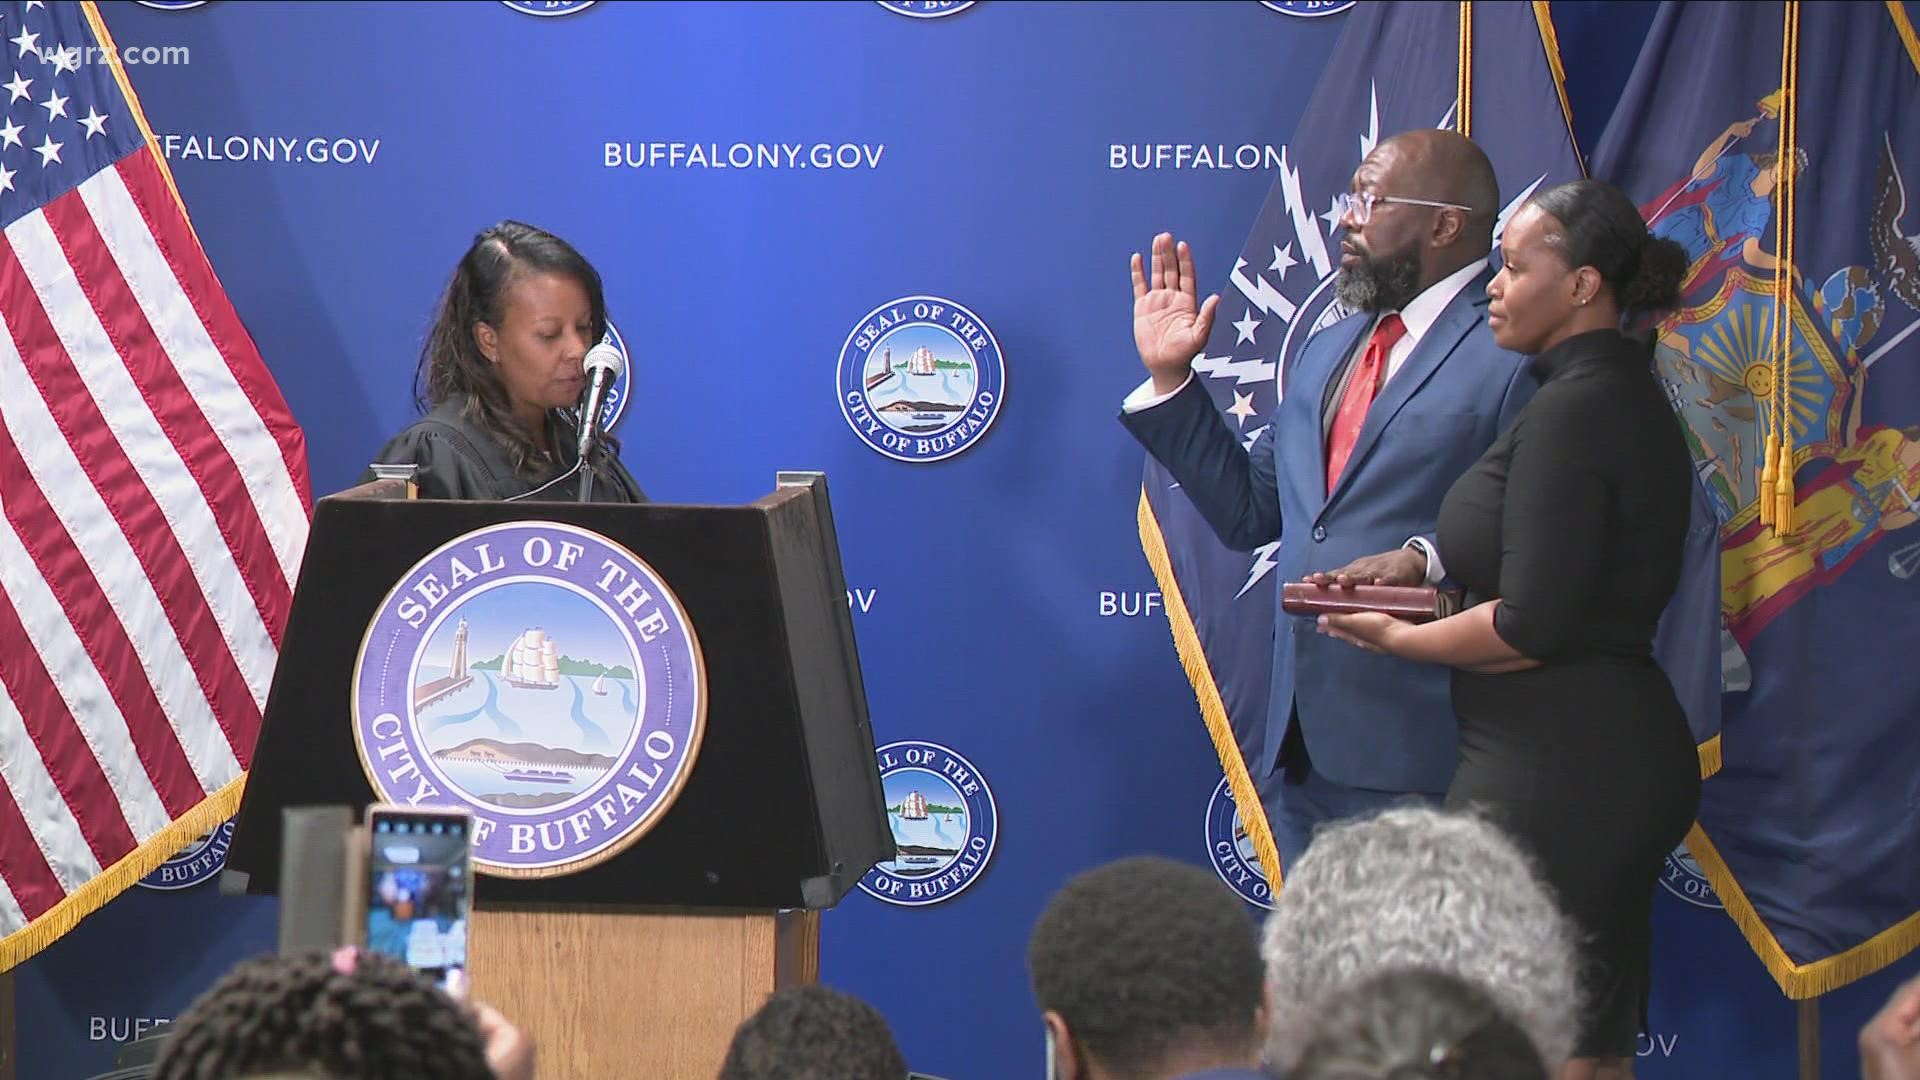 Buffalo Mayor Byron Brown has made two appointments to the city court bench.